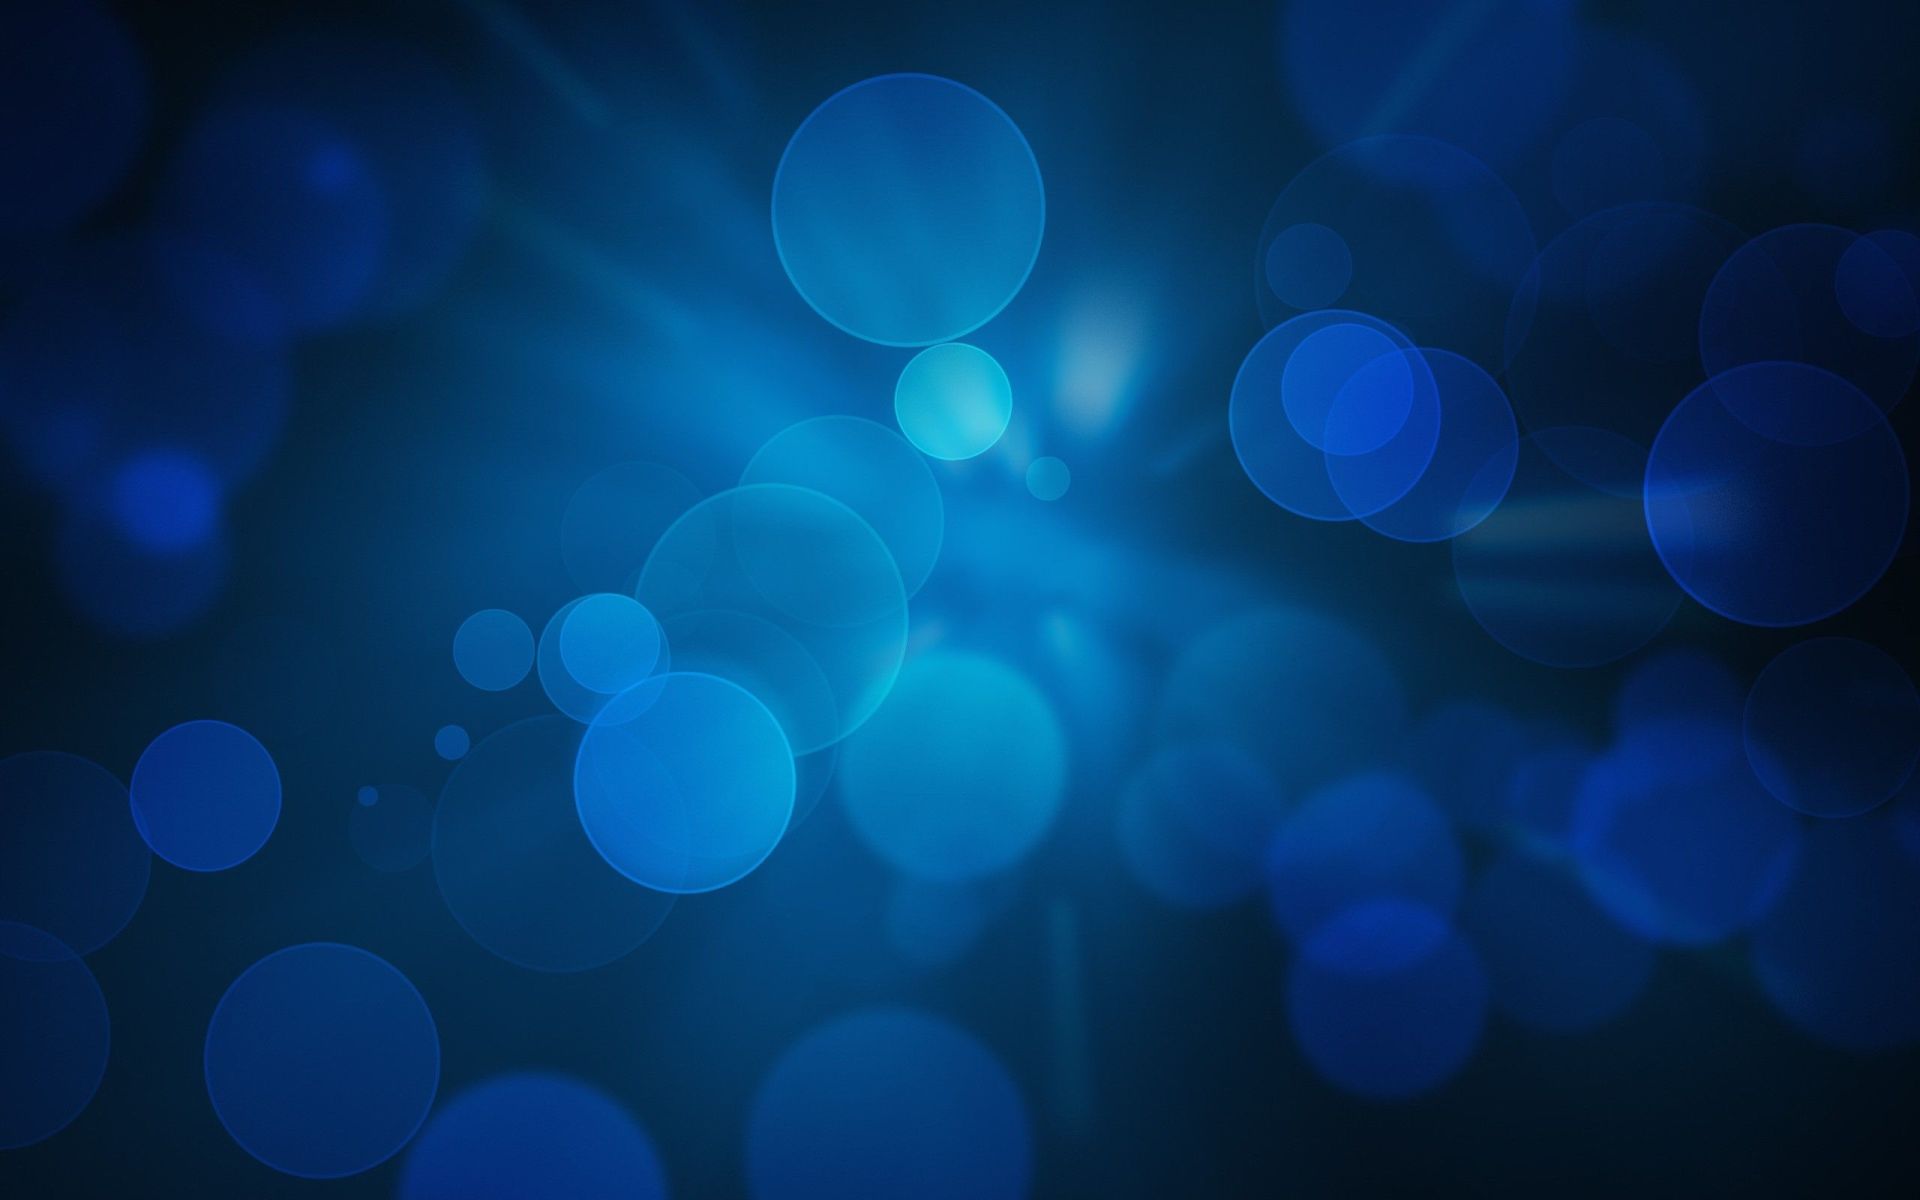 All Blue Wallpapers - Wallpaper Cave